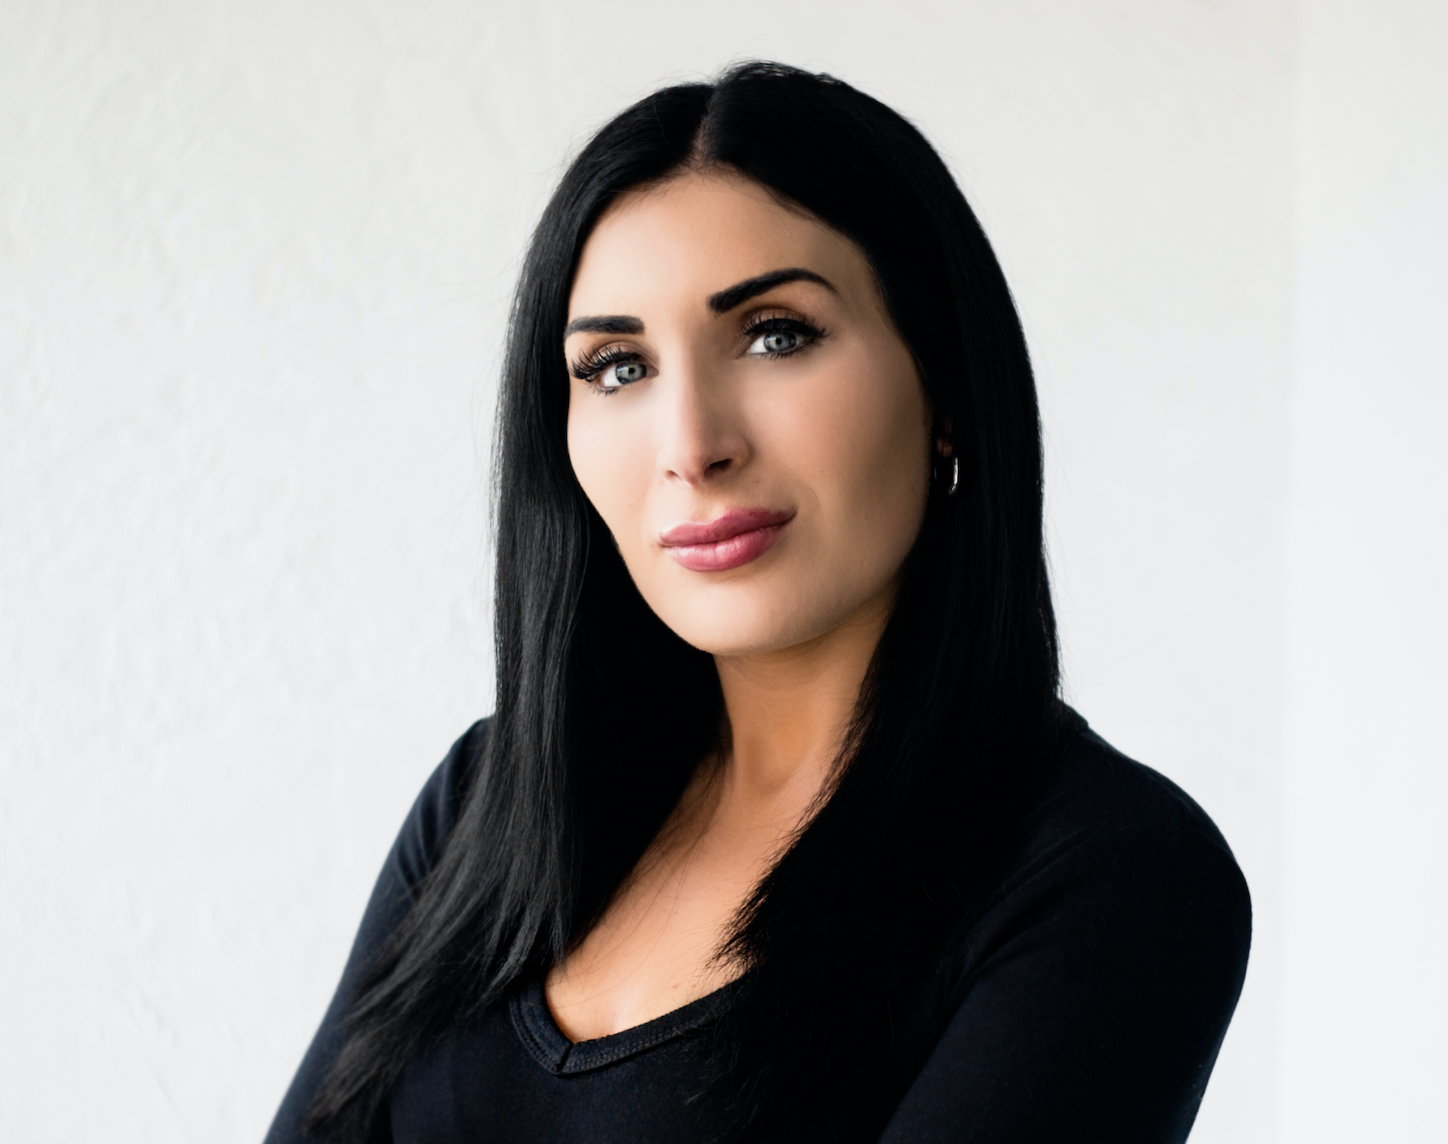 House Republicans Introduce “Tax Free Social Security” Bill First  Proposed by Congressional Candidate Laura Loomer